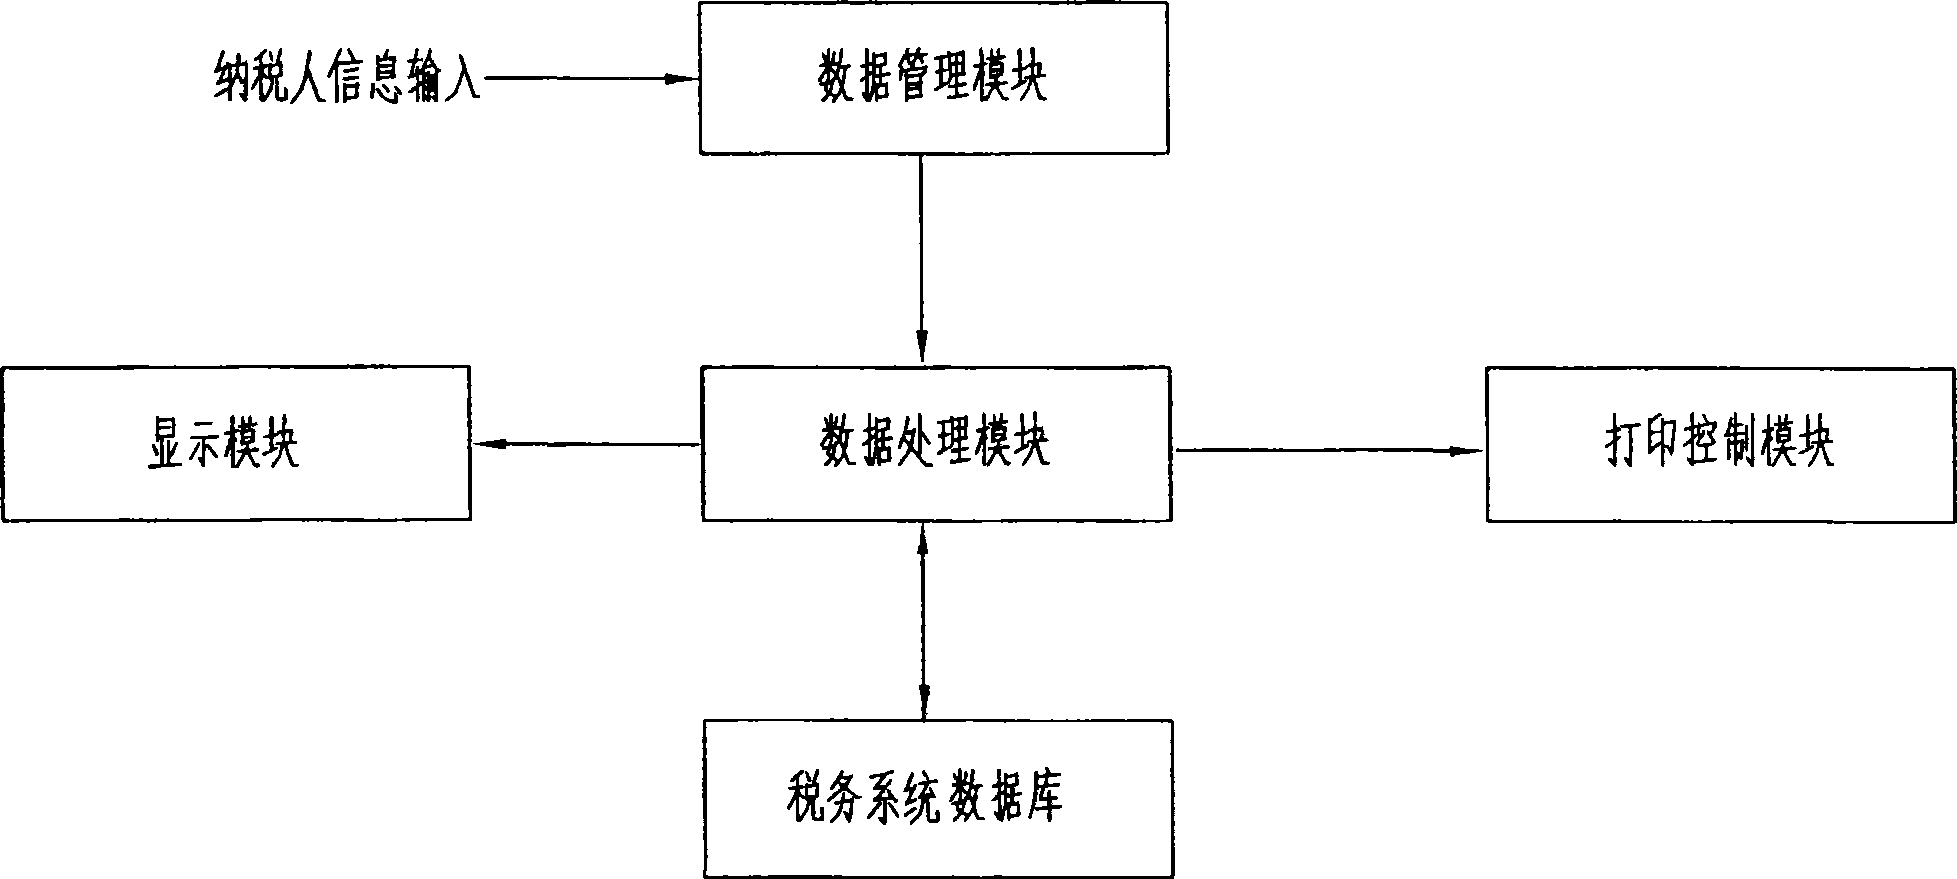 System for making out tax invoices receipt of deducting tax automatically, and application method